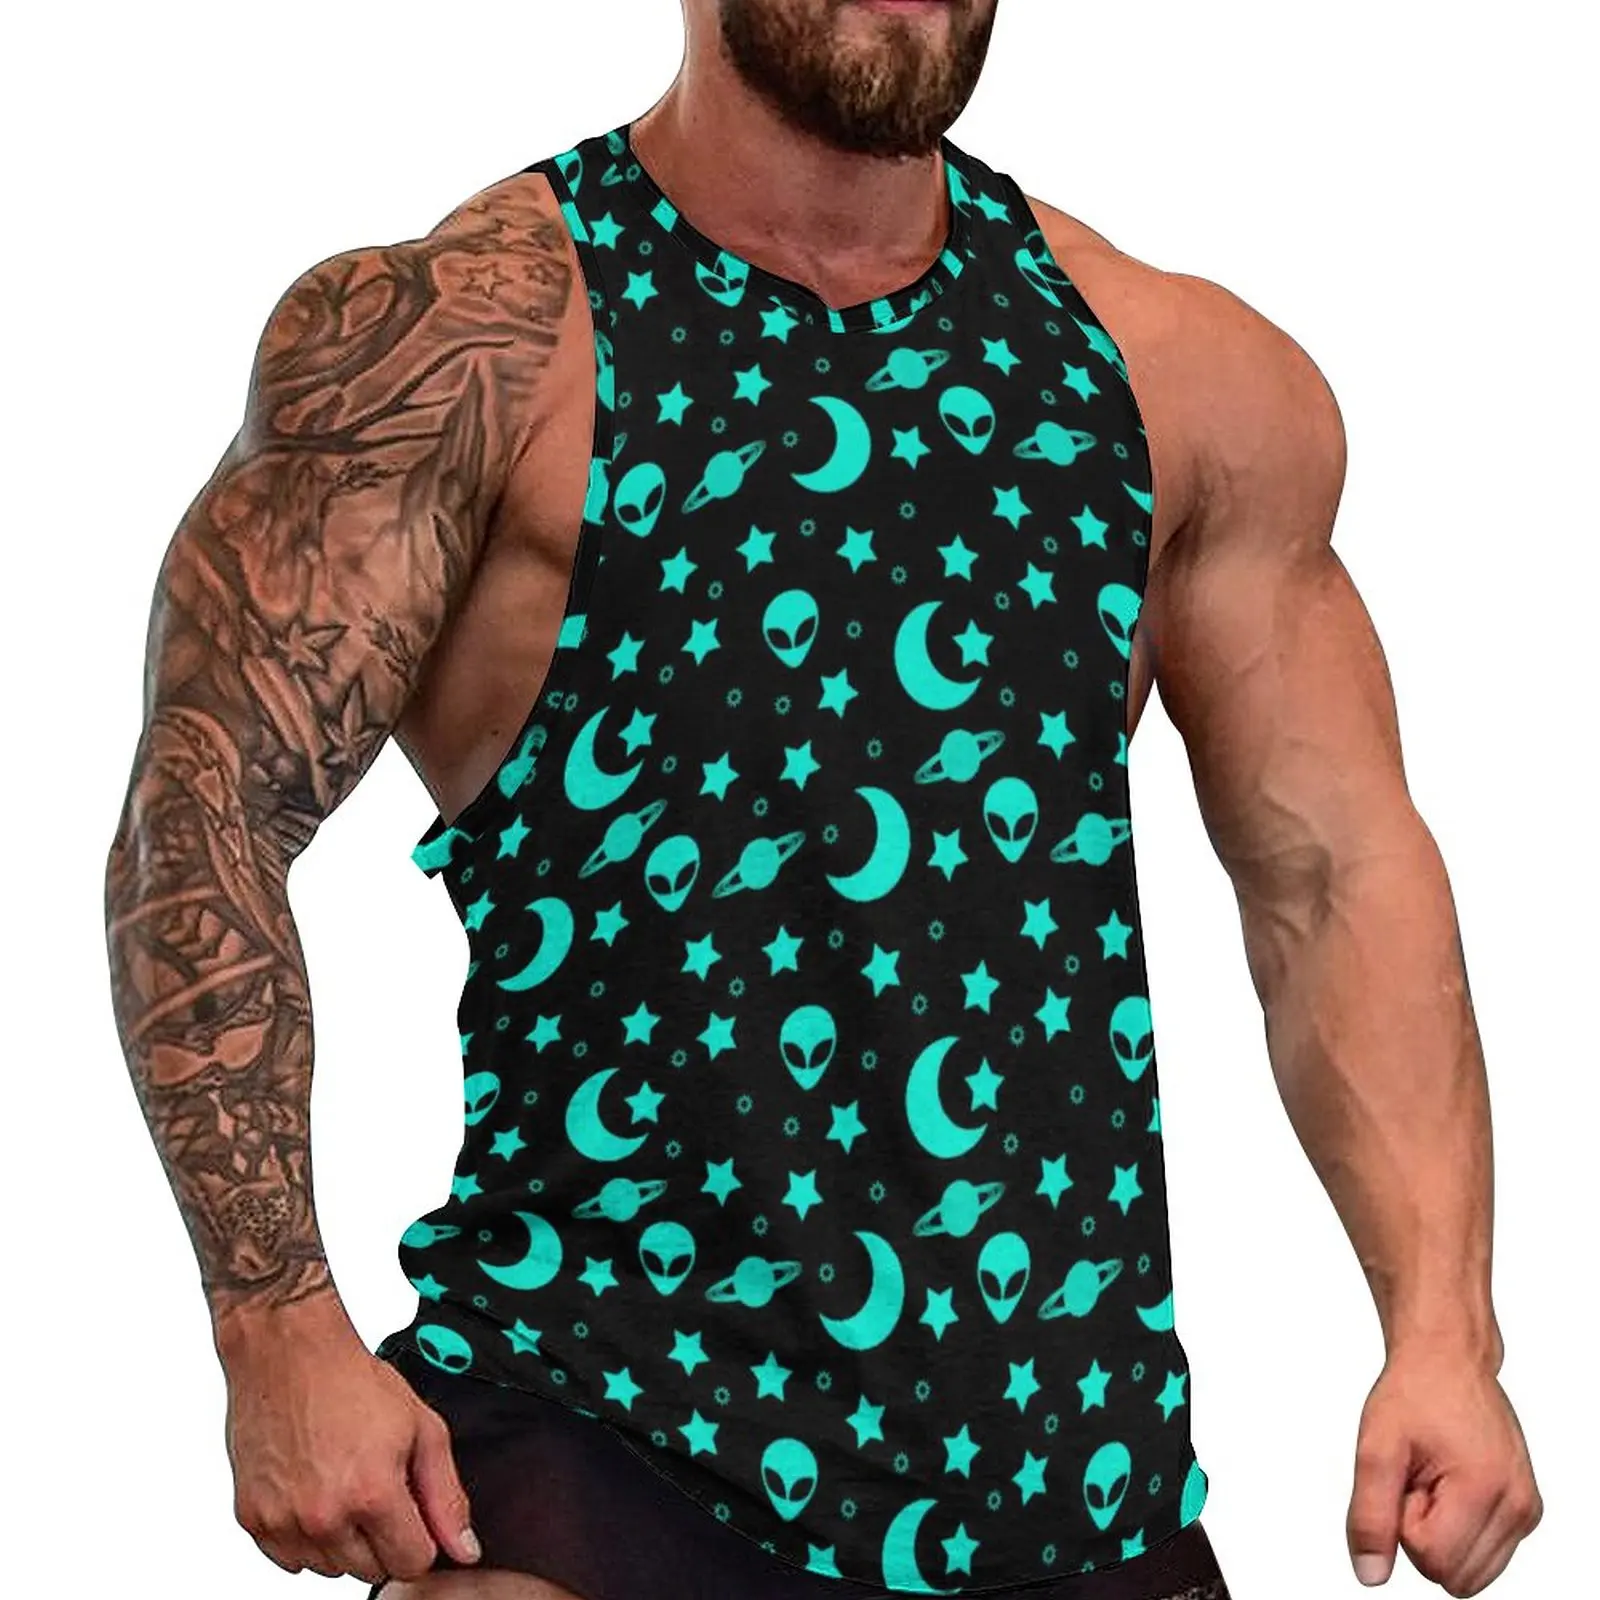 

Star Outer Space Tank Top Men Extra Terrestrial Vintage Tops Summer Bodybuilding Graphic Sleeveless Vests Large Size